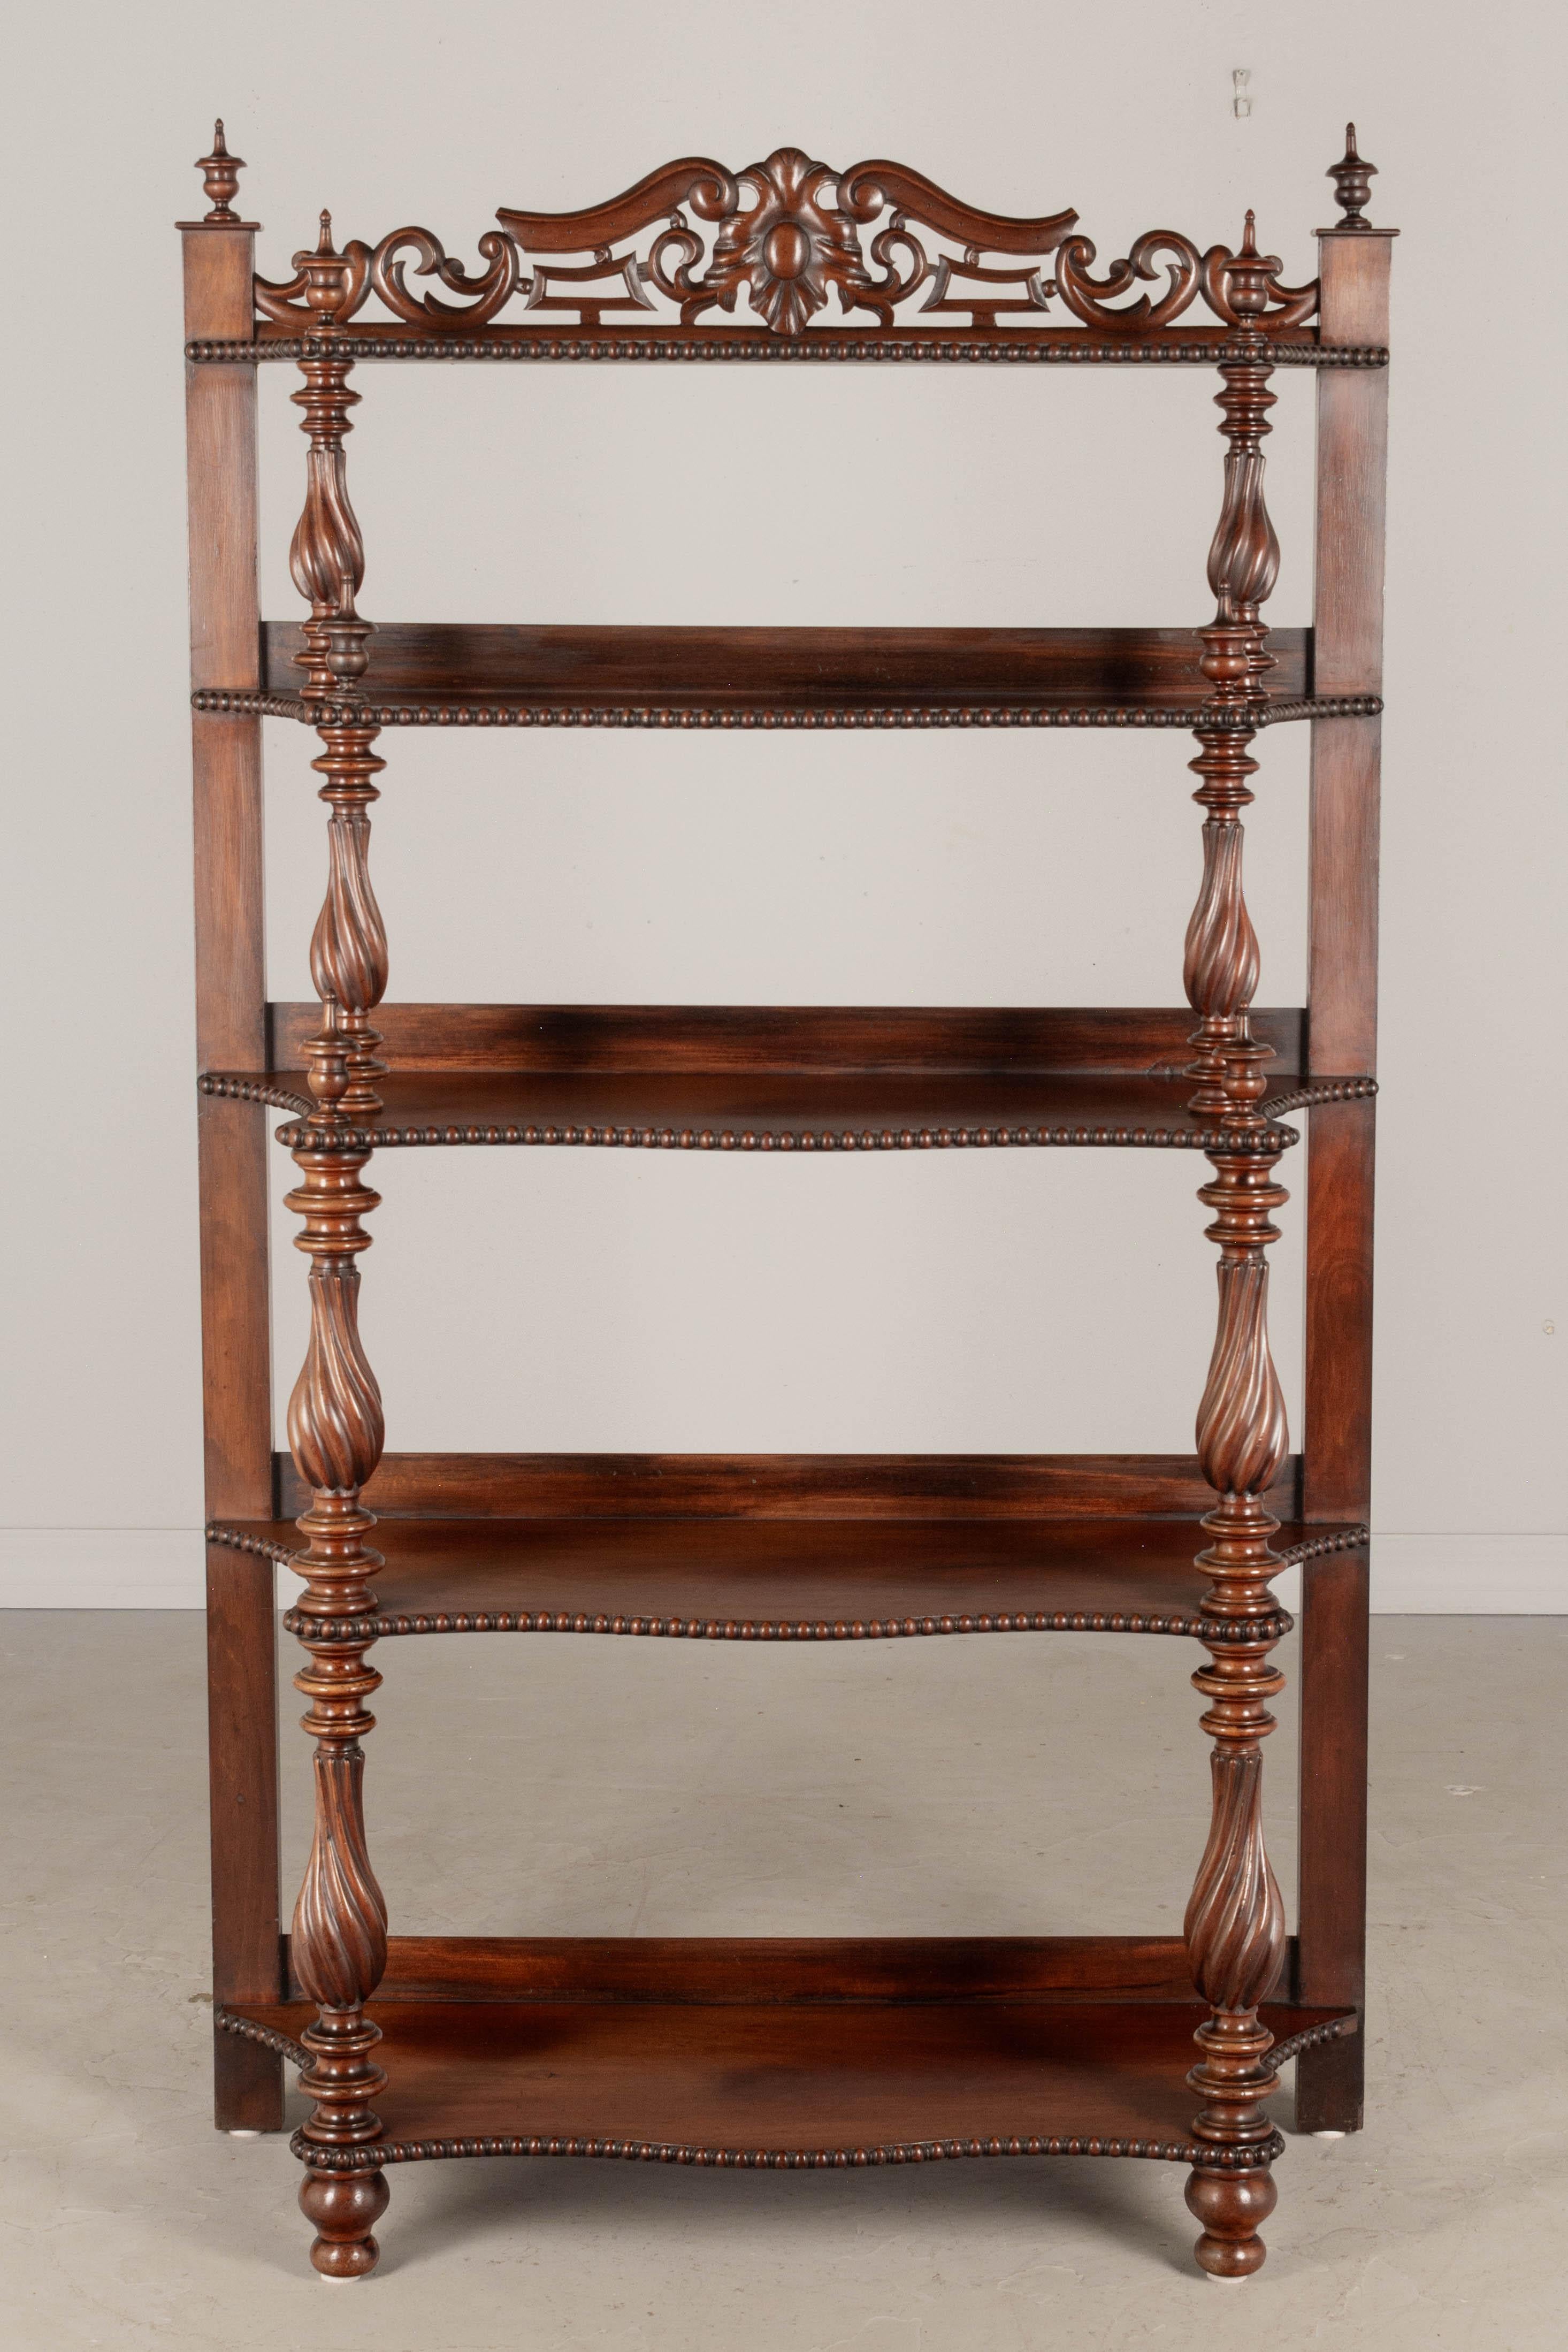 19th Century French Louis Philippe Étagère or Tiered Shelf In Good Condition For Sale In Winter Park, FL